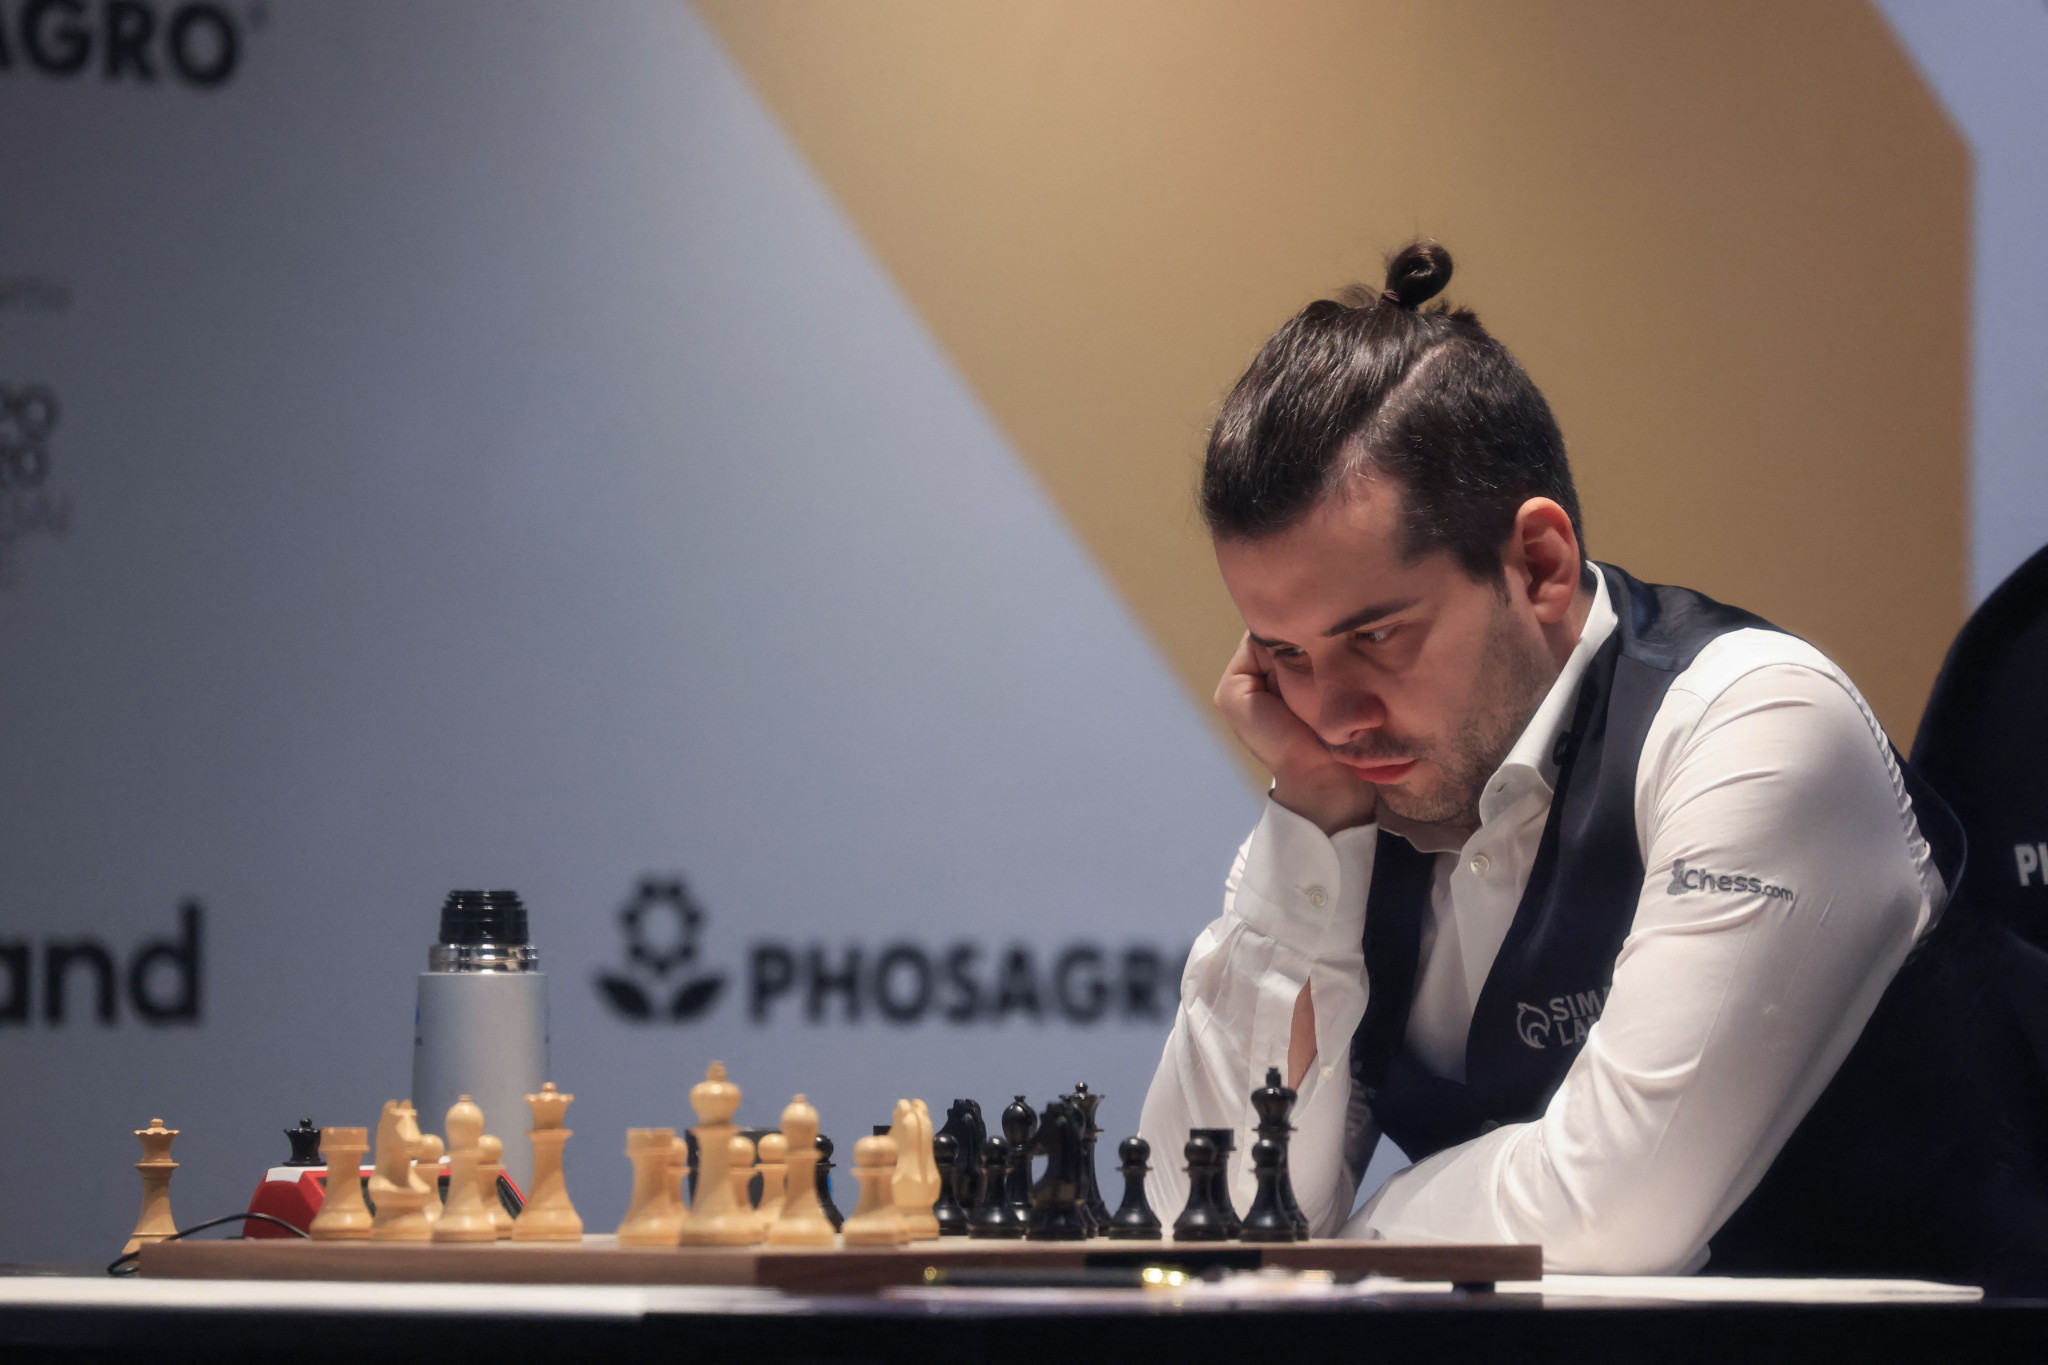 Ian Nepomniachtchi, who is from Russia but competing at the FIDE World Championship final in Dubai neutrally, has drawn both games against holder Magnus Carlsen so far ©Getty Images 